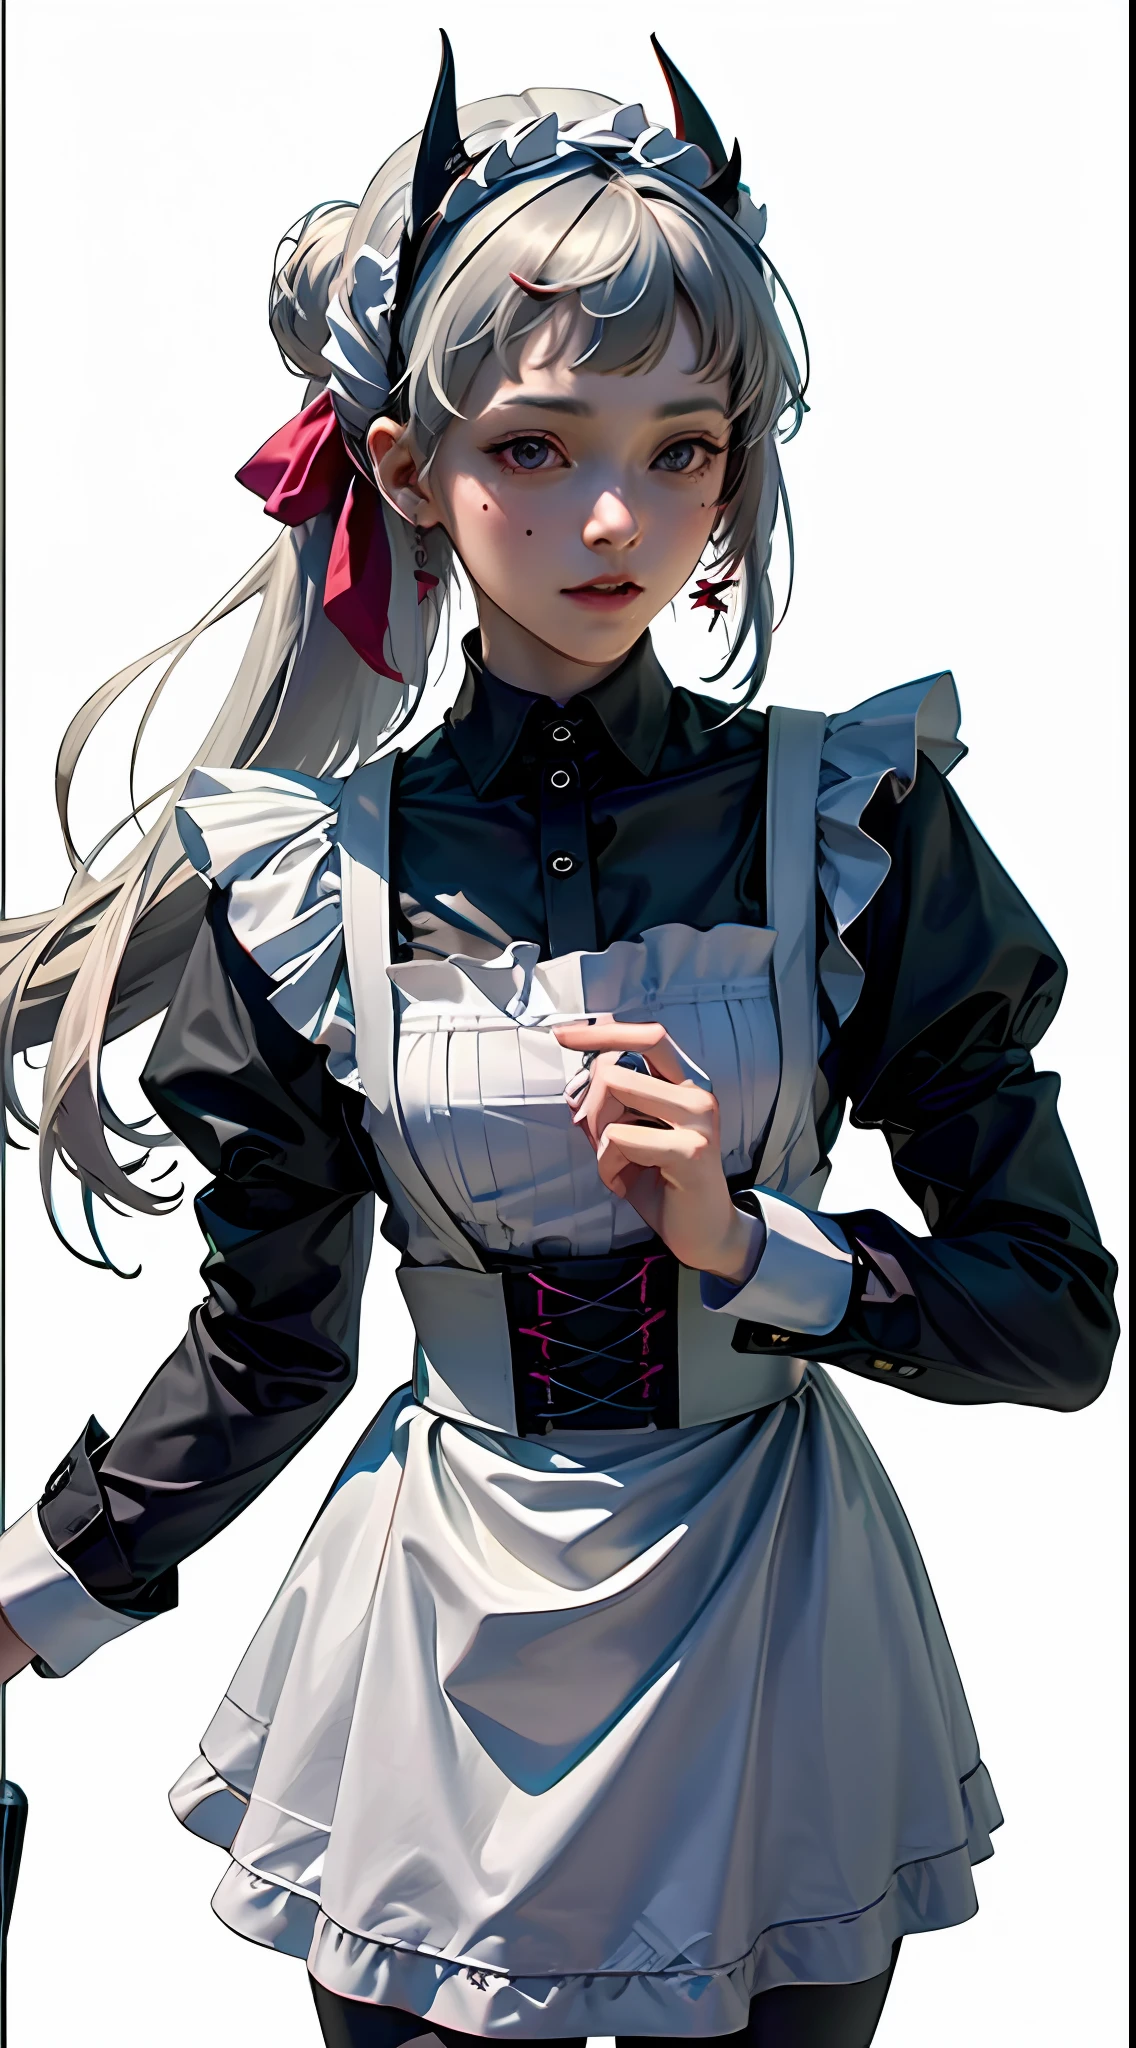 offcial art， Unity 8k Wallpapers， ultra - detailed， Beautiful and beautiful， tmasterpiece， best qualtiy， scientific fiction， （natta：1.2）， （1girll：1.3）， （young：1.1），The picture is clear，a close up of a woman in a dress and stockings, gorgeous maid, Maid outfit，is shy， ssmile， Be red in the face， long whitr hair， whaite hair， Striped hair， red eyes， Hair Bow， Moles under the eyes， （cinmatic lighting：1.2），A person poses for a photo in a maid costume，the maid outfit，laced dress，Luxury theme，realistic dress，The skin details are very detailed，Watch machinery，Beautiful Maid，Feminine beauty，Stunning character art，Ray traching